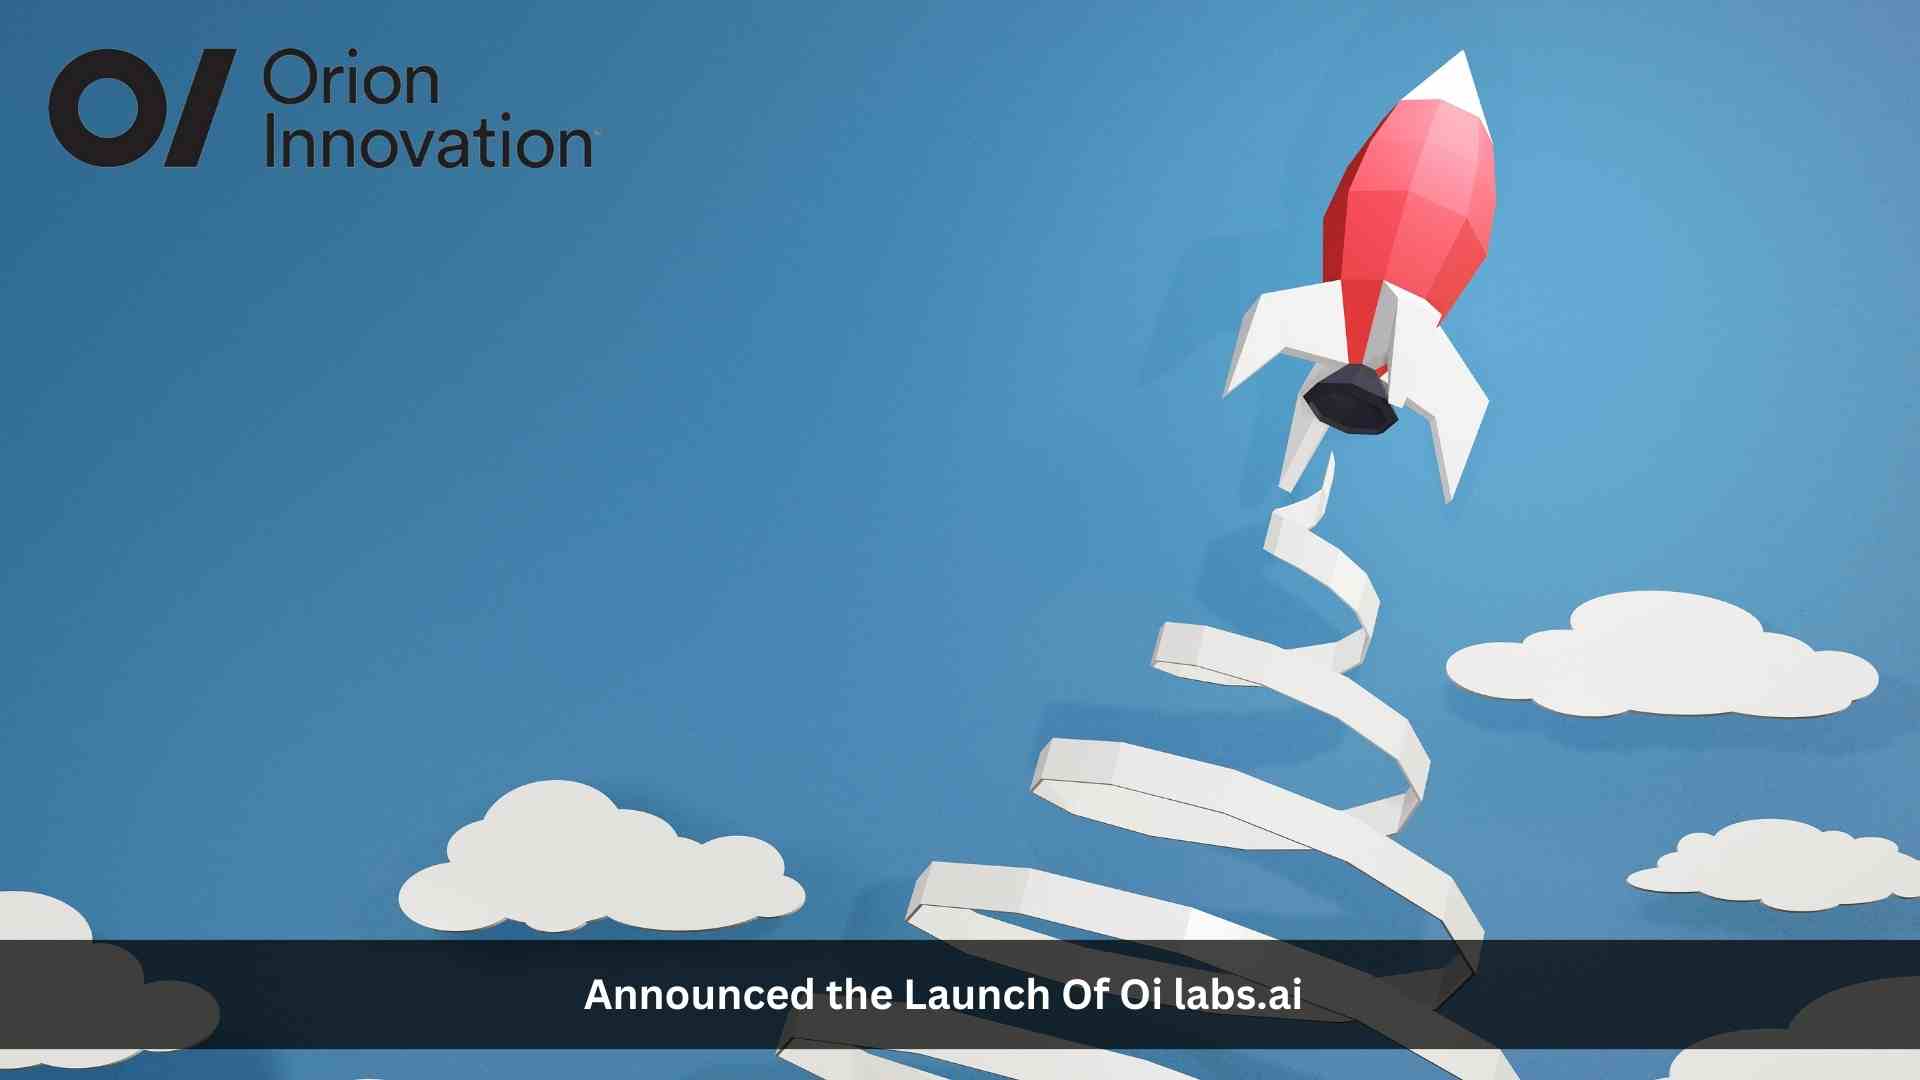 Orion Innovation Launches OI Labs.ai